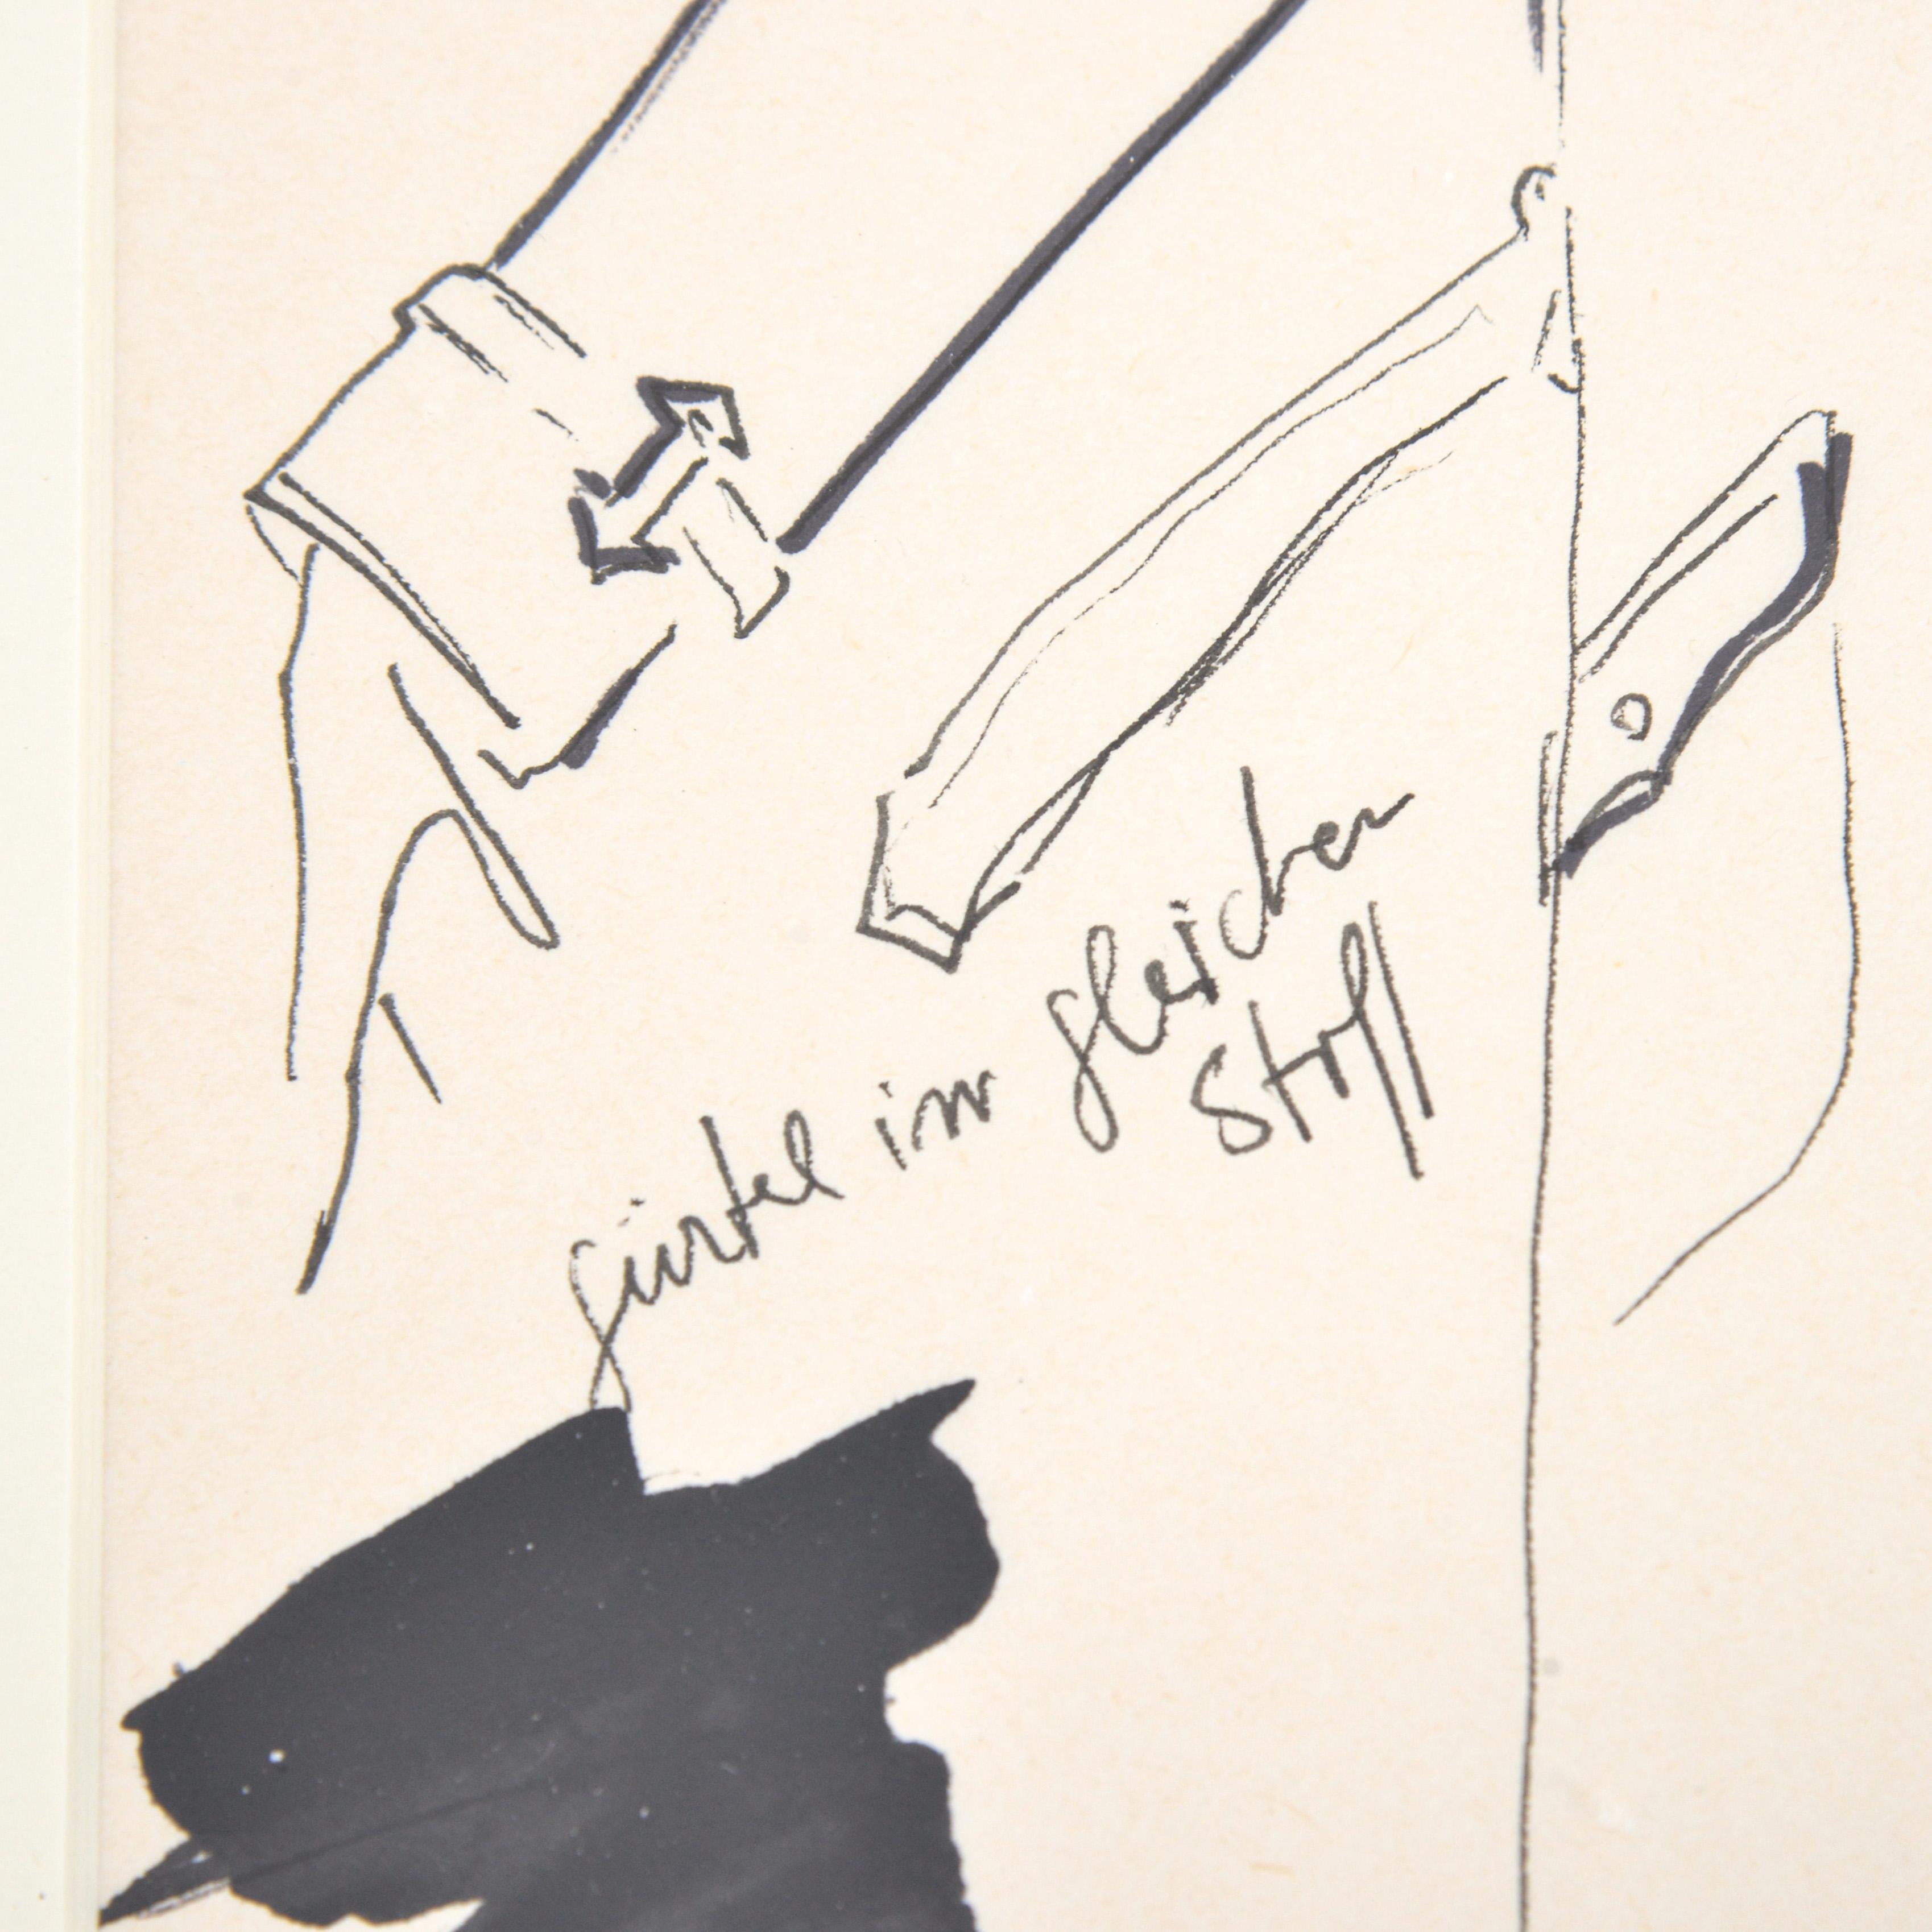 Karl Lagerfeld Signed Fashion Drawing / Collage & Stationery In Good Condition For Sale In Lake Worth Beach, FL